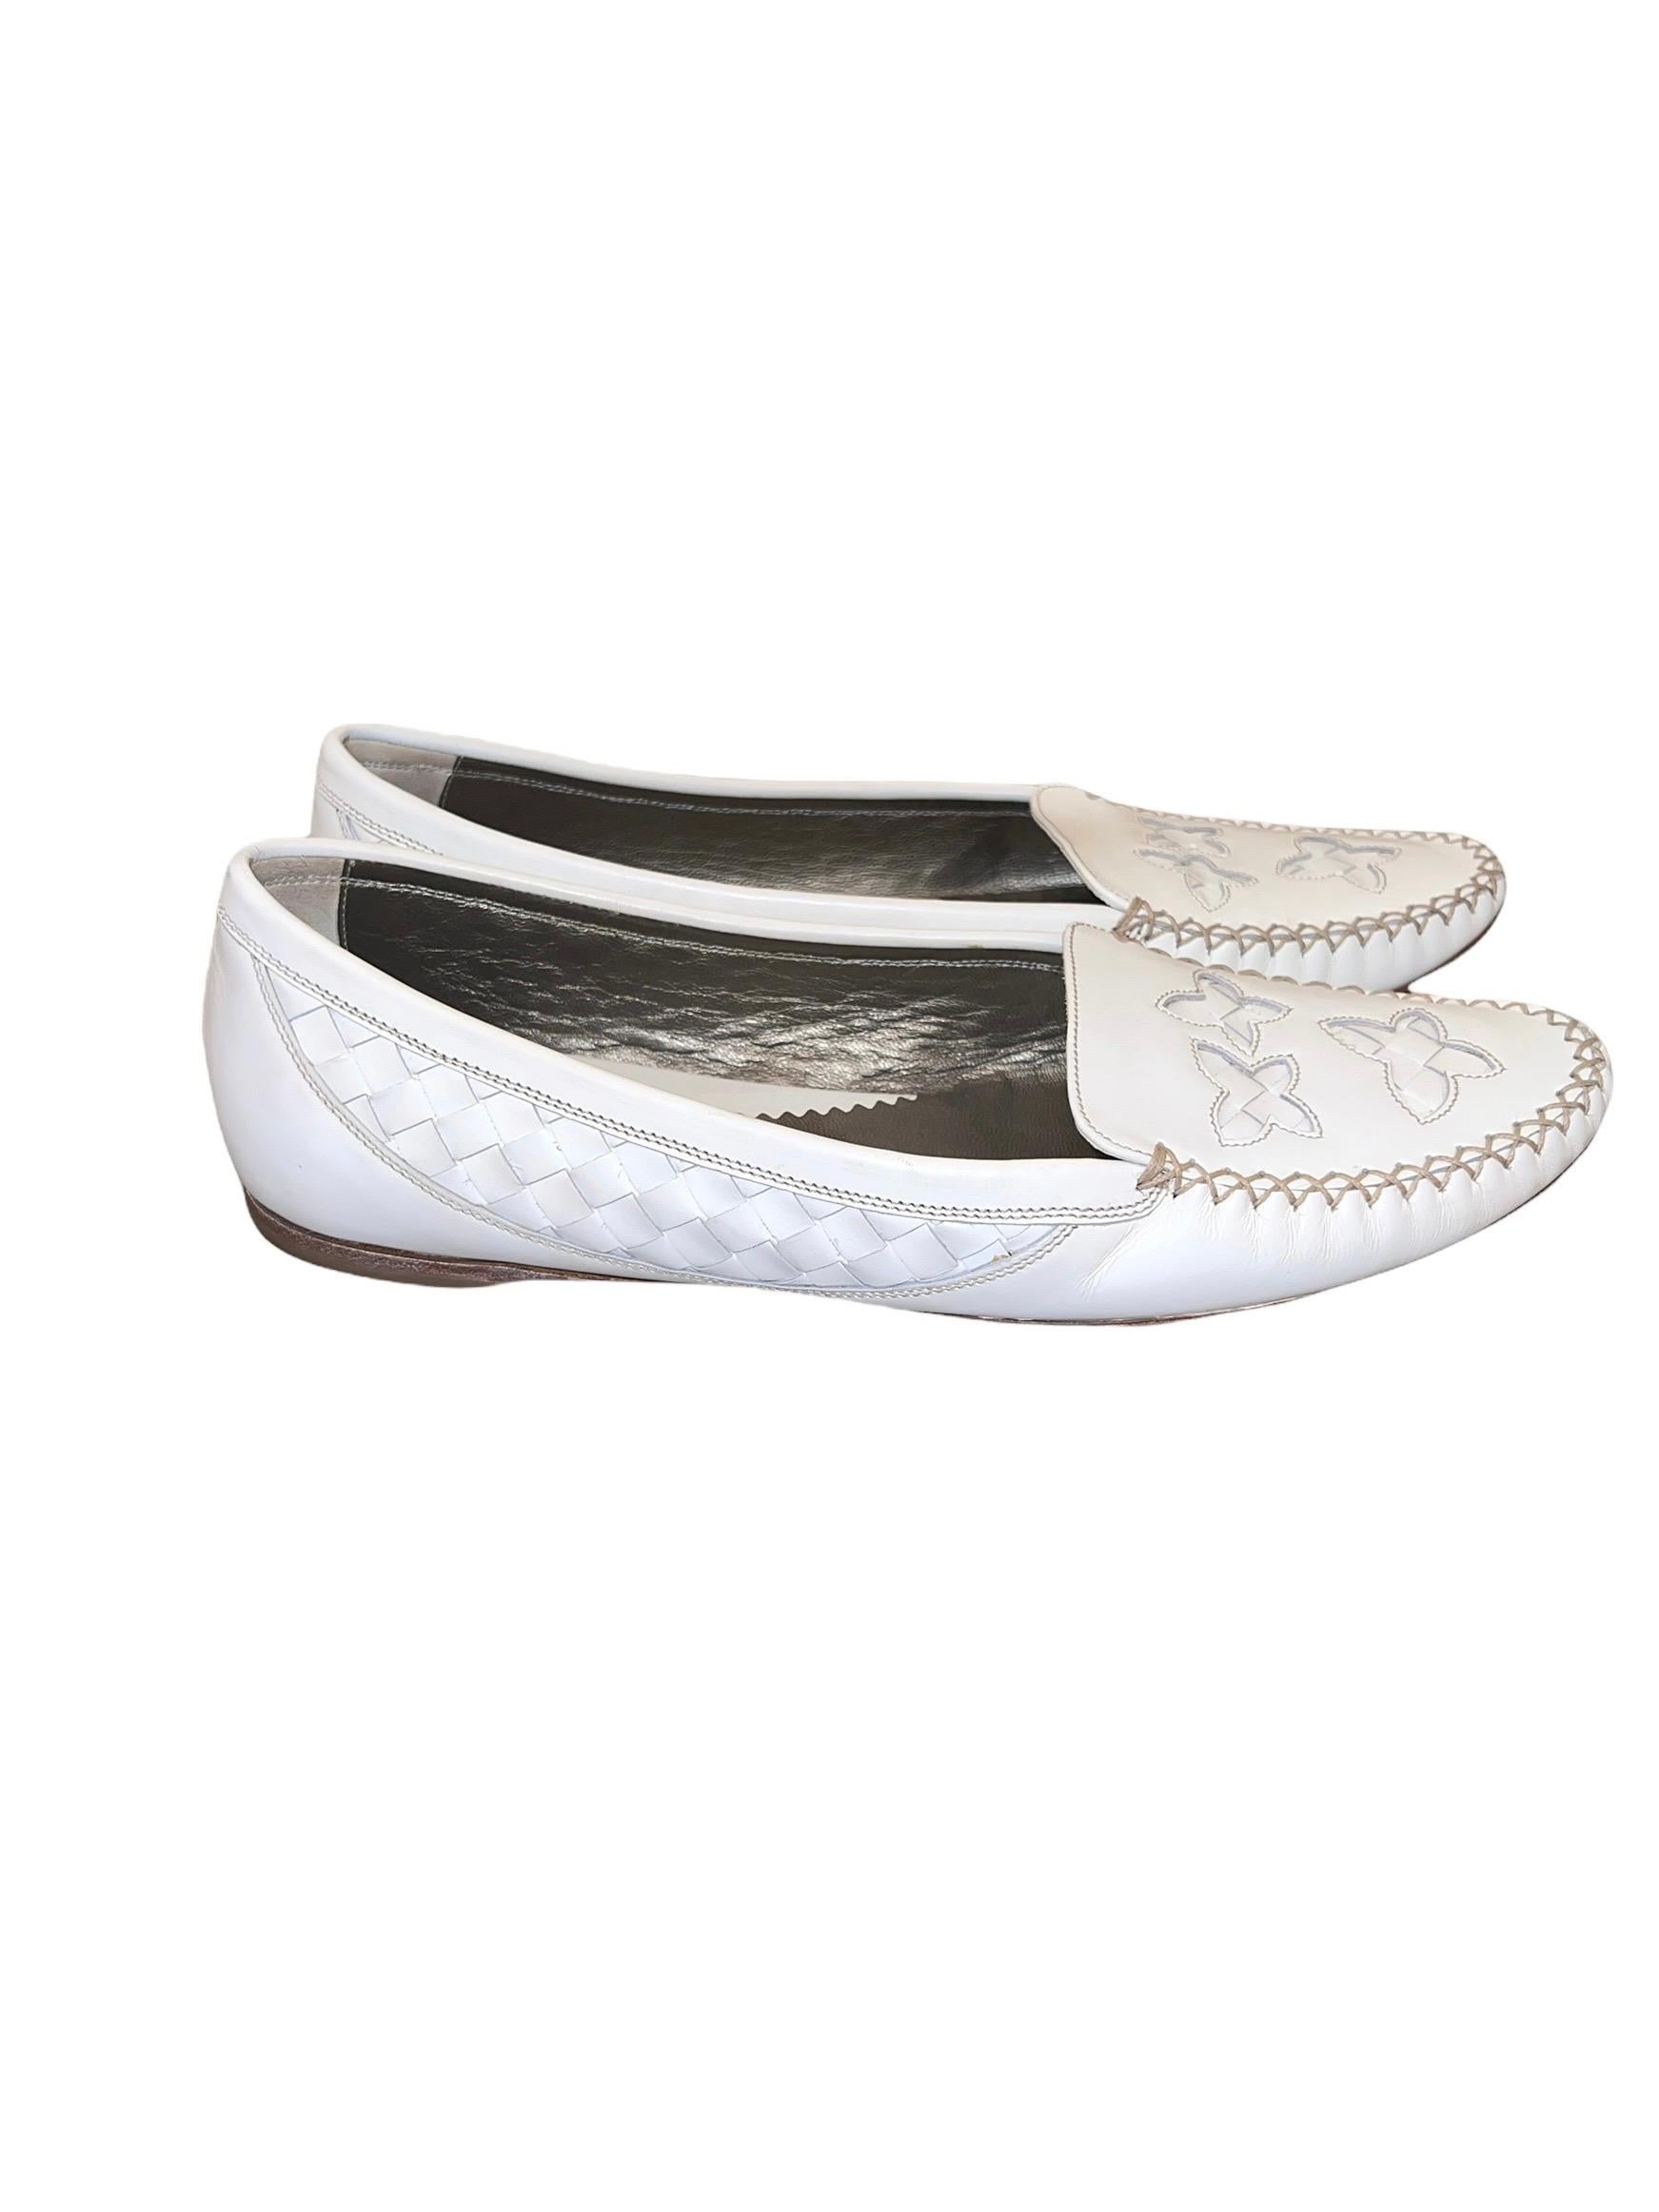 Bottega Veneta's white intrecciato leather loafers are a stylish summer choice. 
Stunning Bottega Veneta Loafers
Finest white leather with intrecciato cutout details 
Hand-stitched trimming in front
Welt-sewn leather sole hand-stitched
Size EU